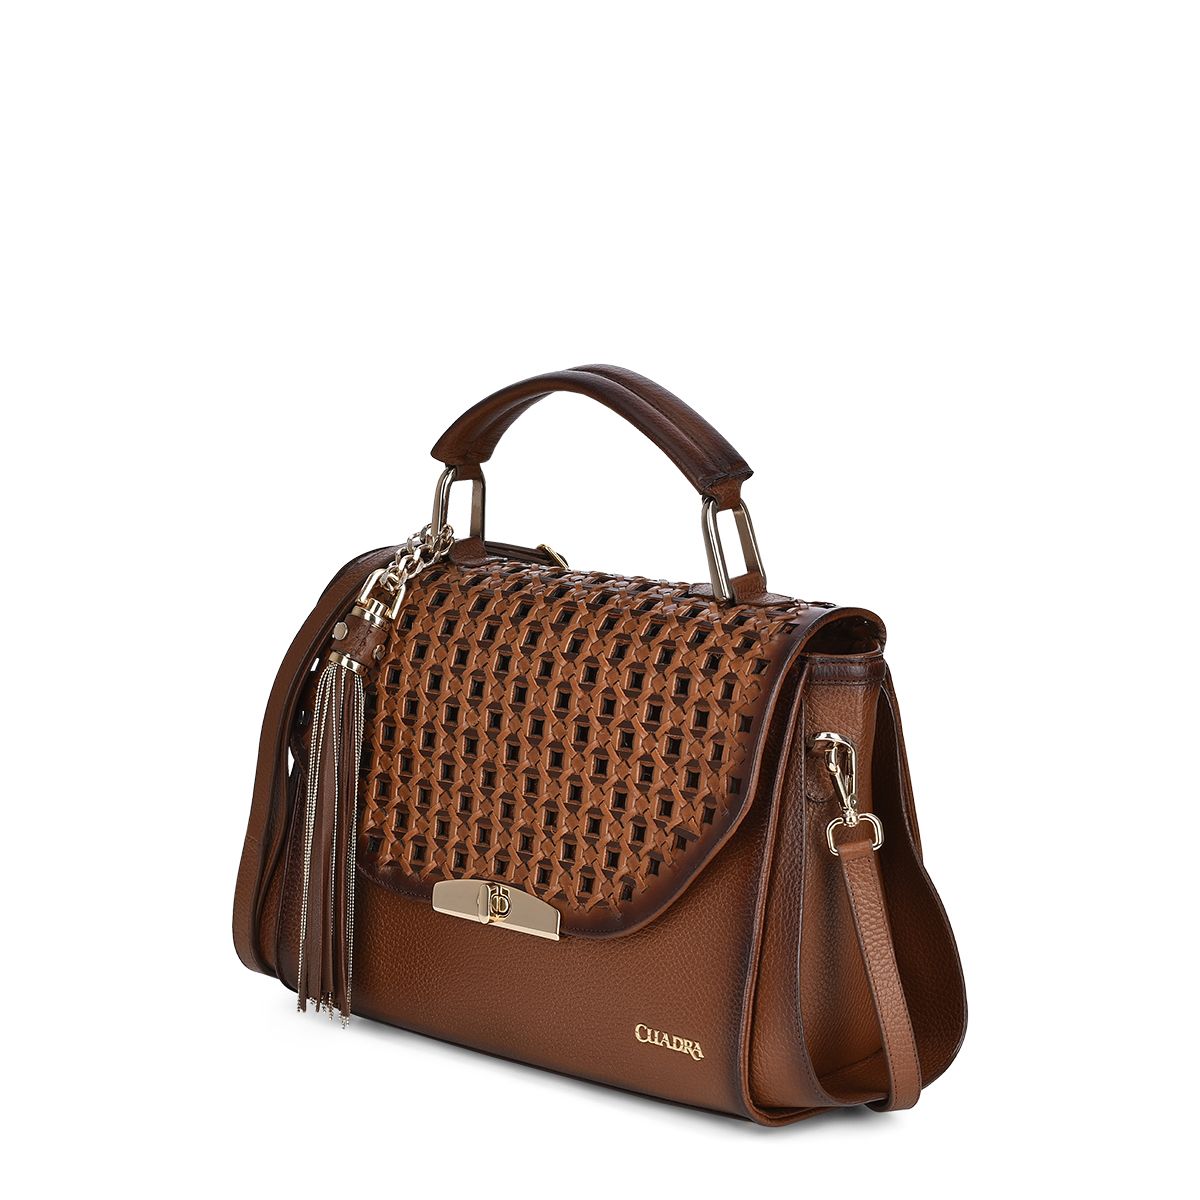 The lid shows handcrafted interweaving work, adding a touch of artistry and uniqueness to your bag